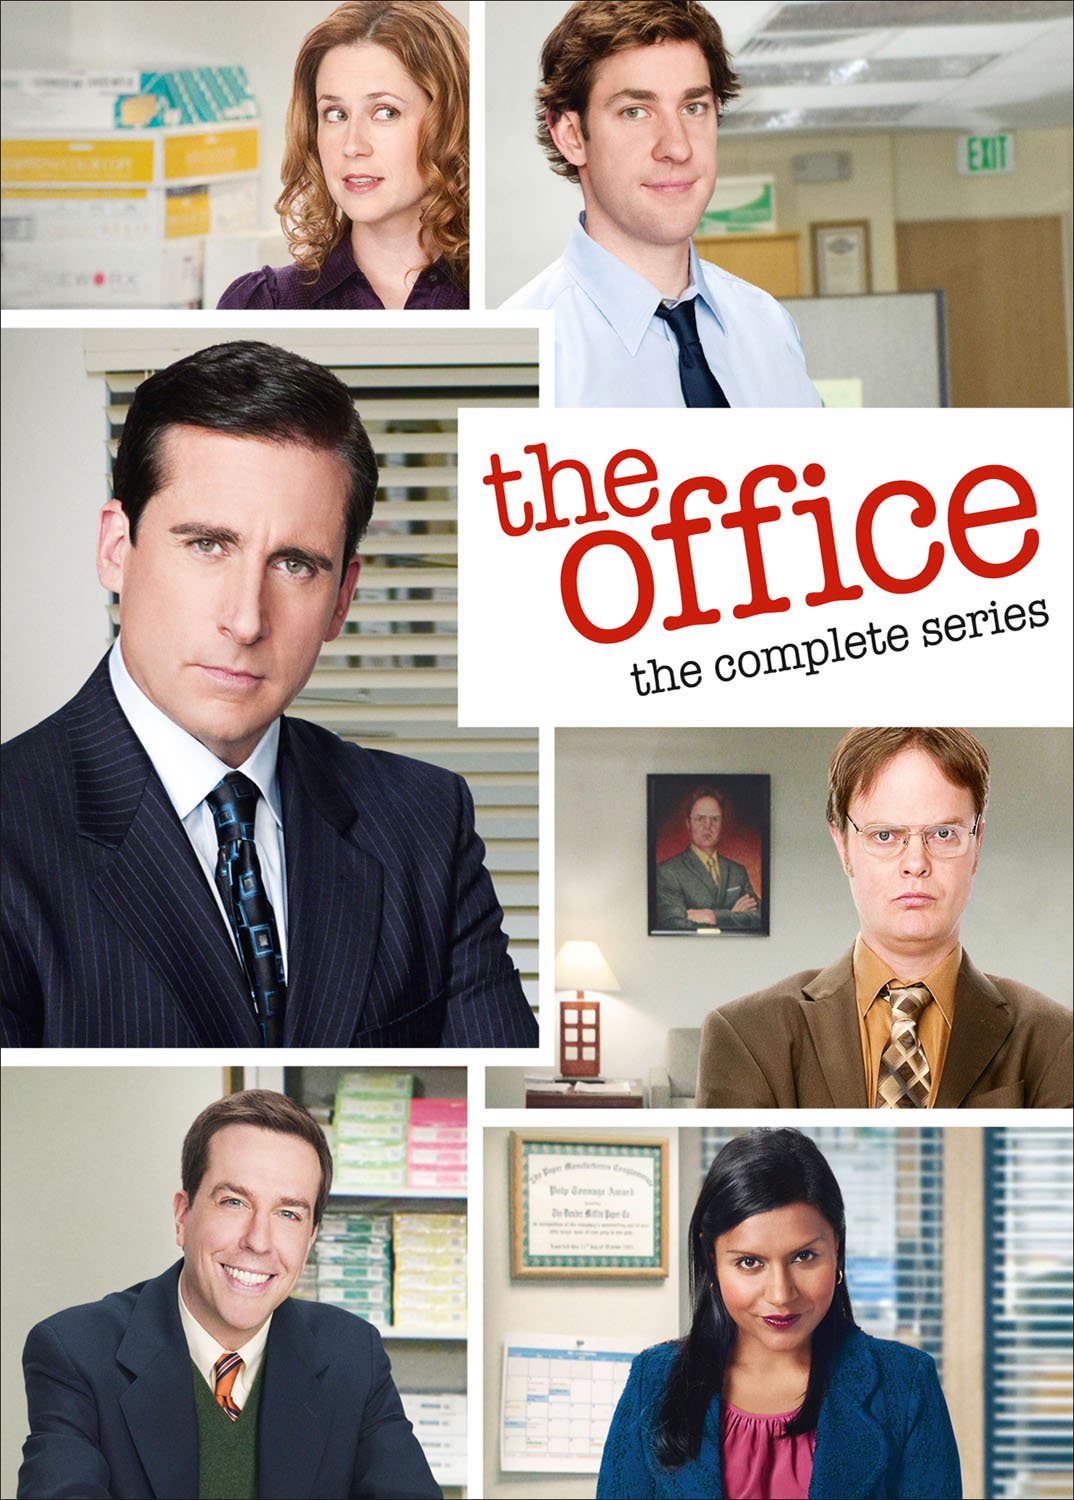 The Office: The Complete Series (DVD), Universal Studios, Comedy - image 2 of 5